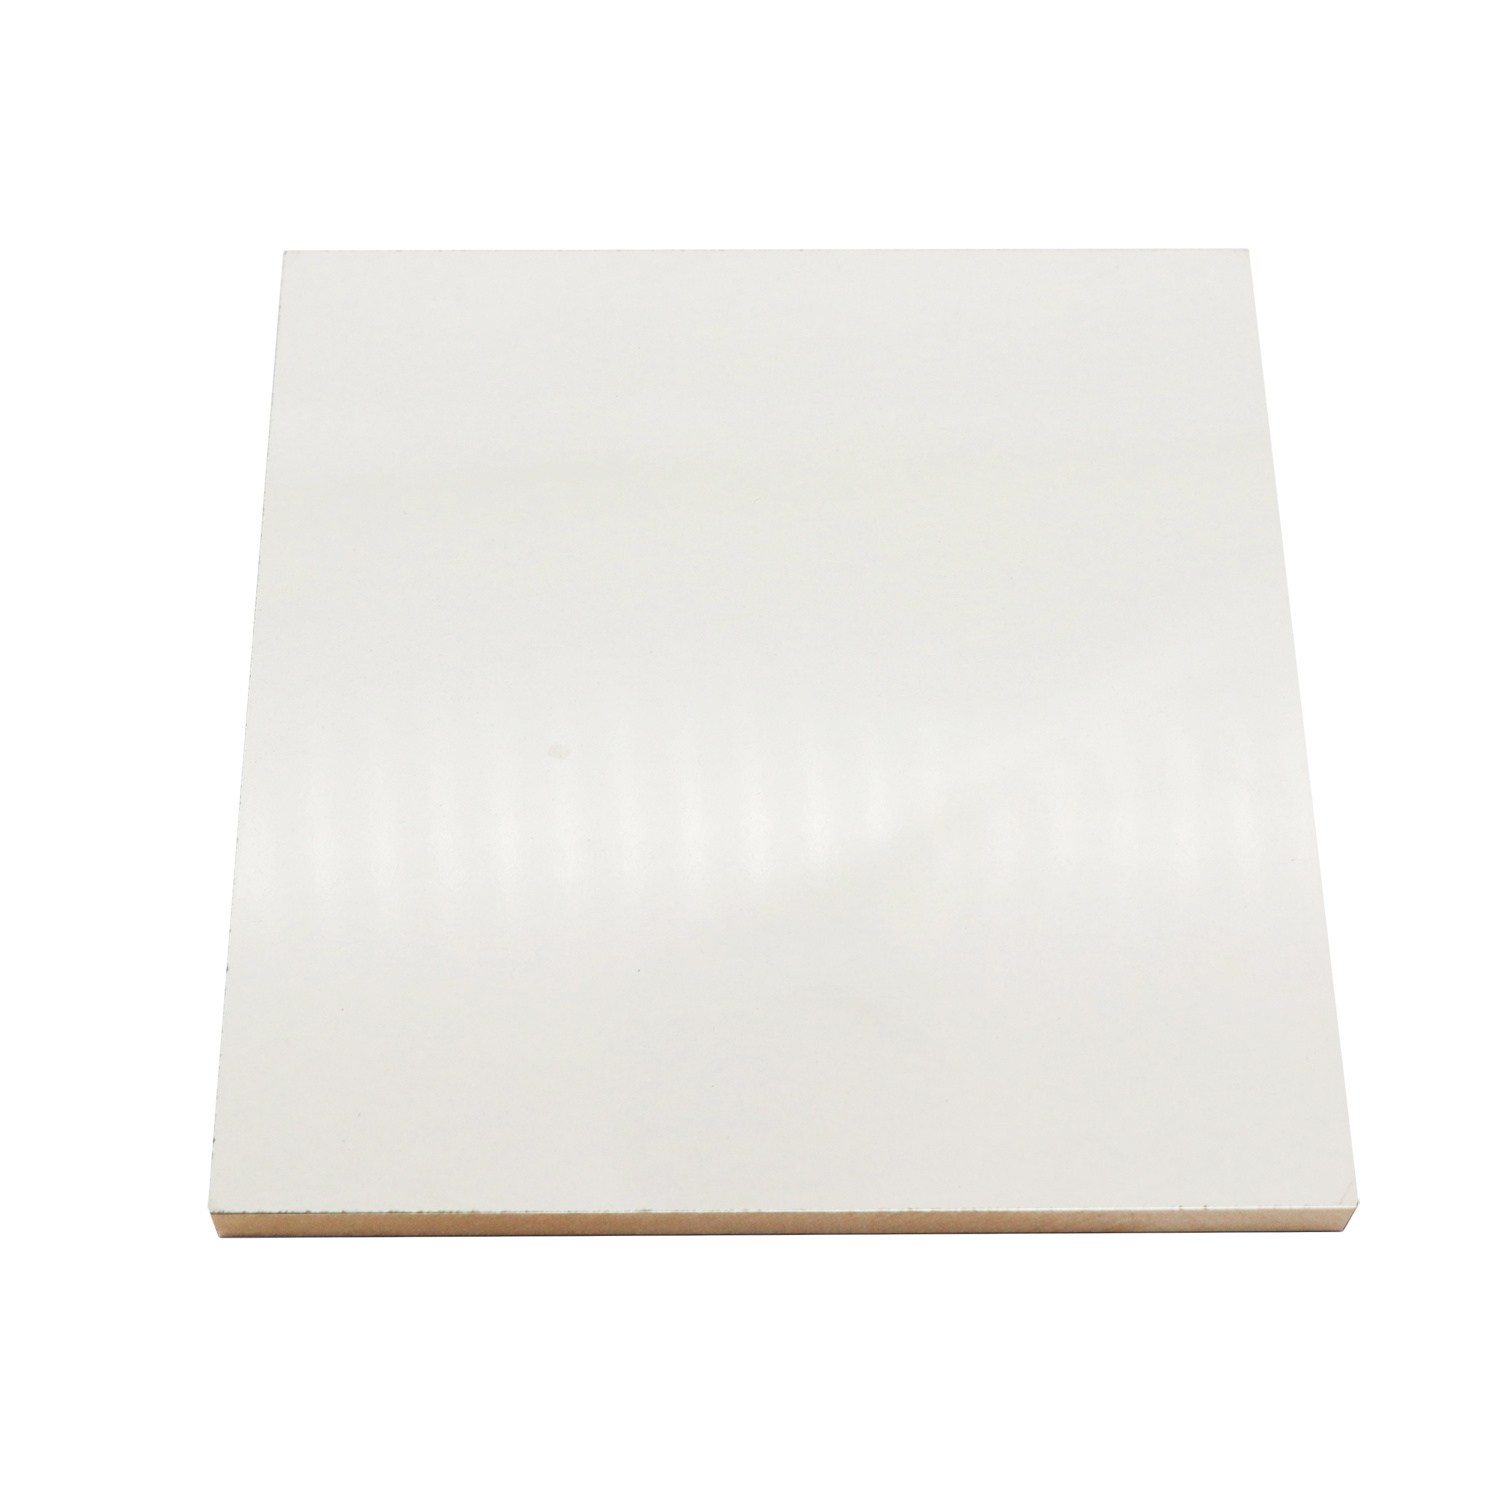 Linyi Factory Direct Melamine Film Faced MDF Board White Fiberboard for Home Decoration